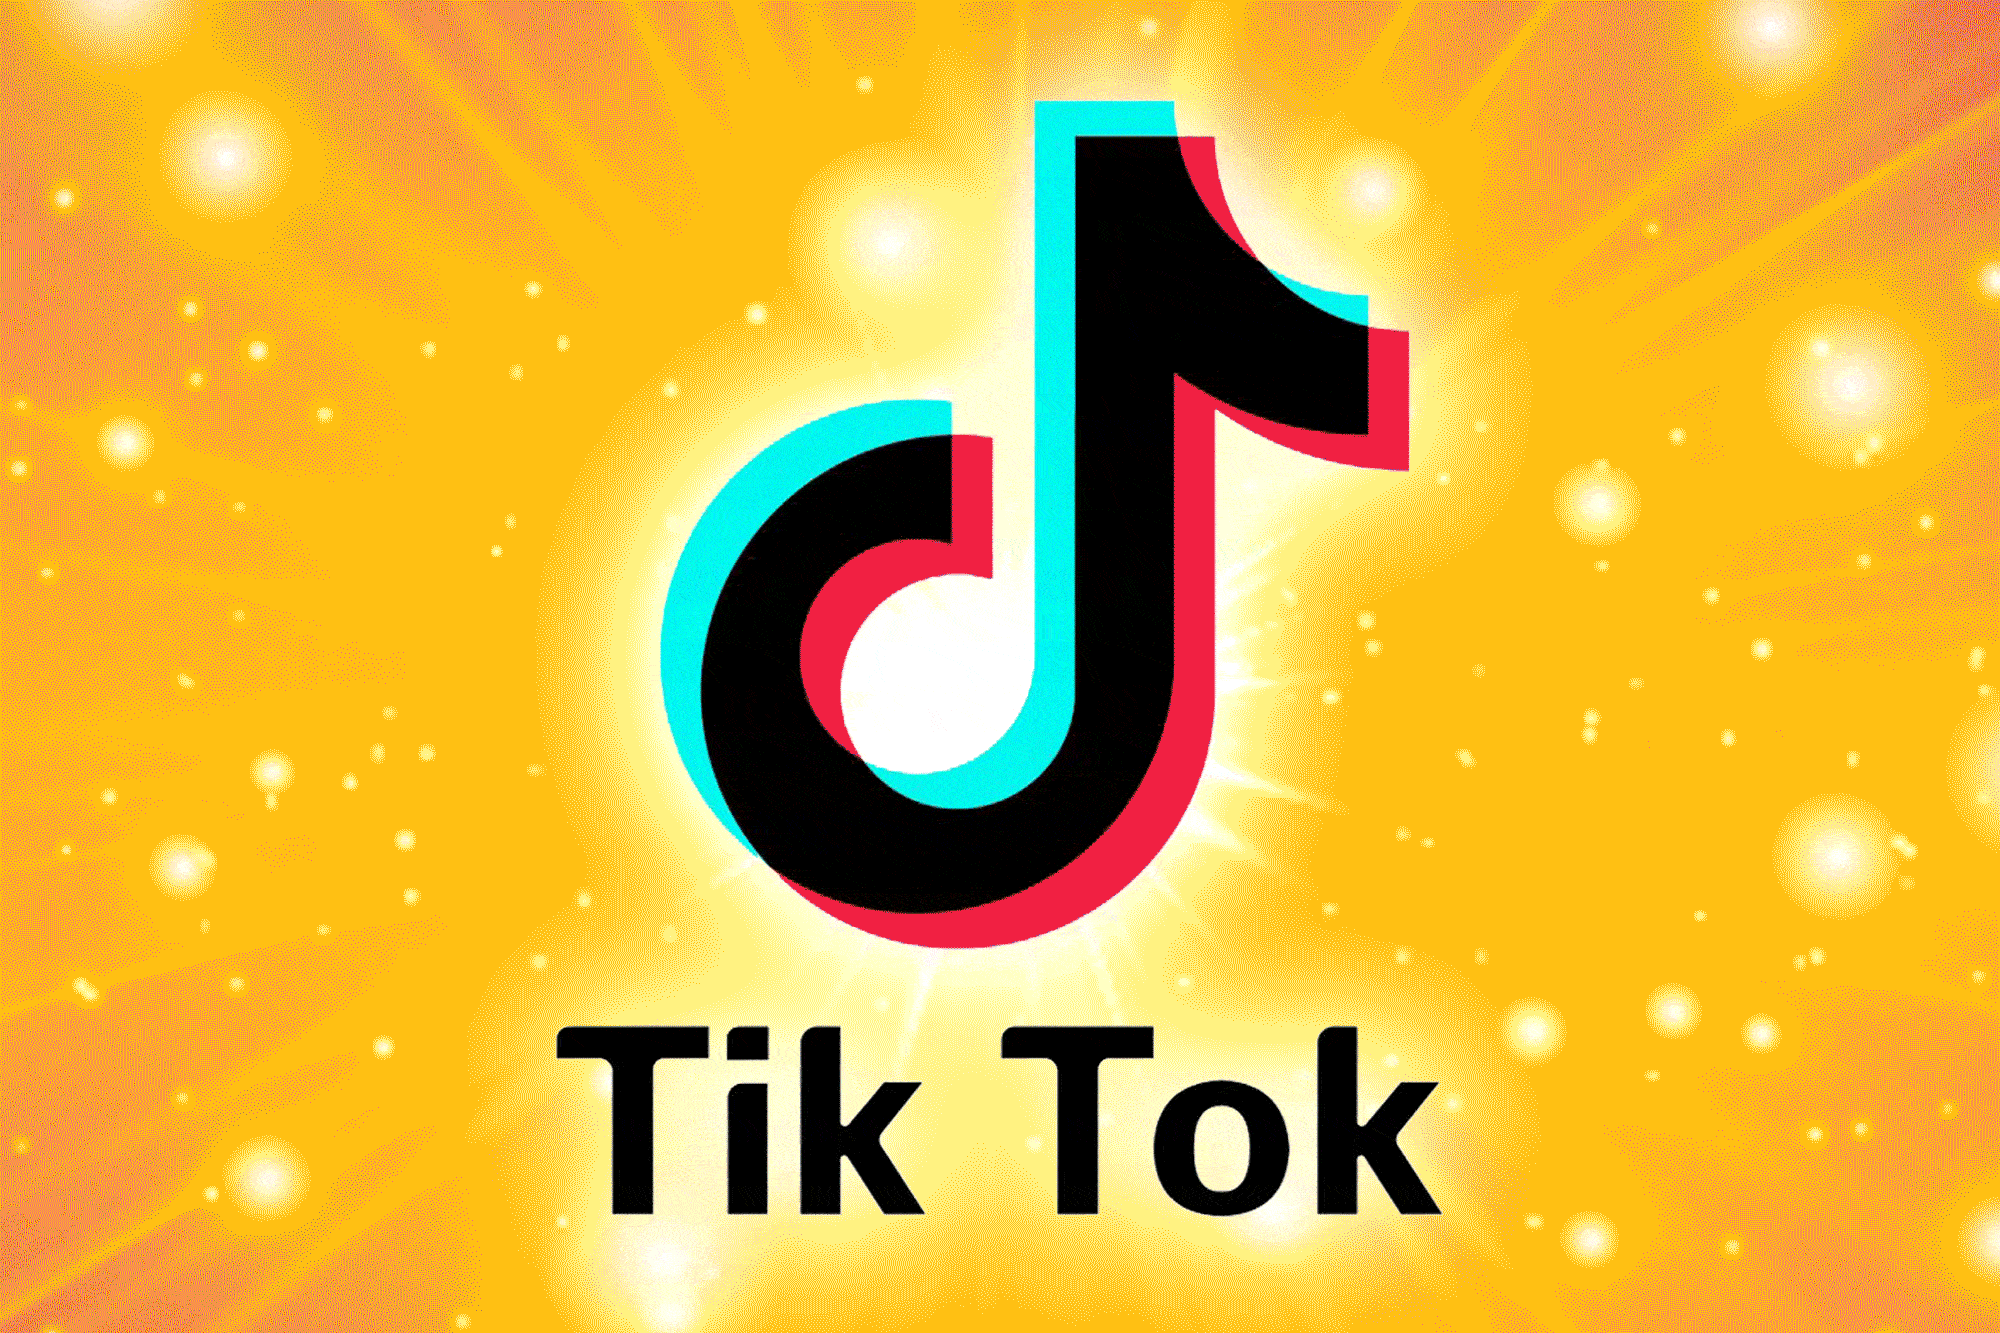 Wall Street and tech billionaires race to buy banned TikTok